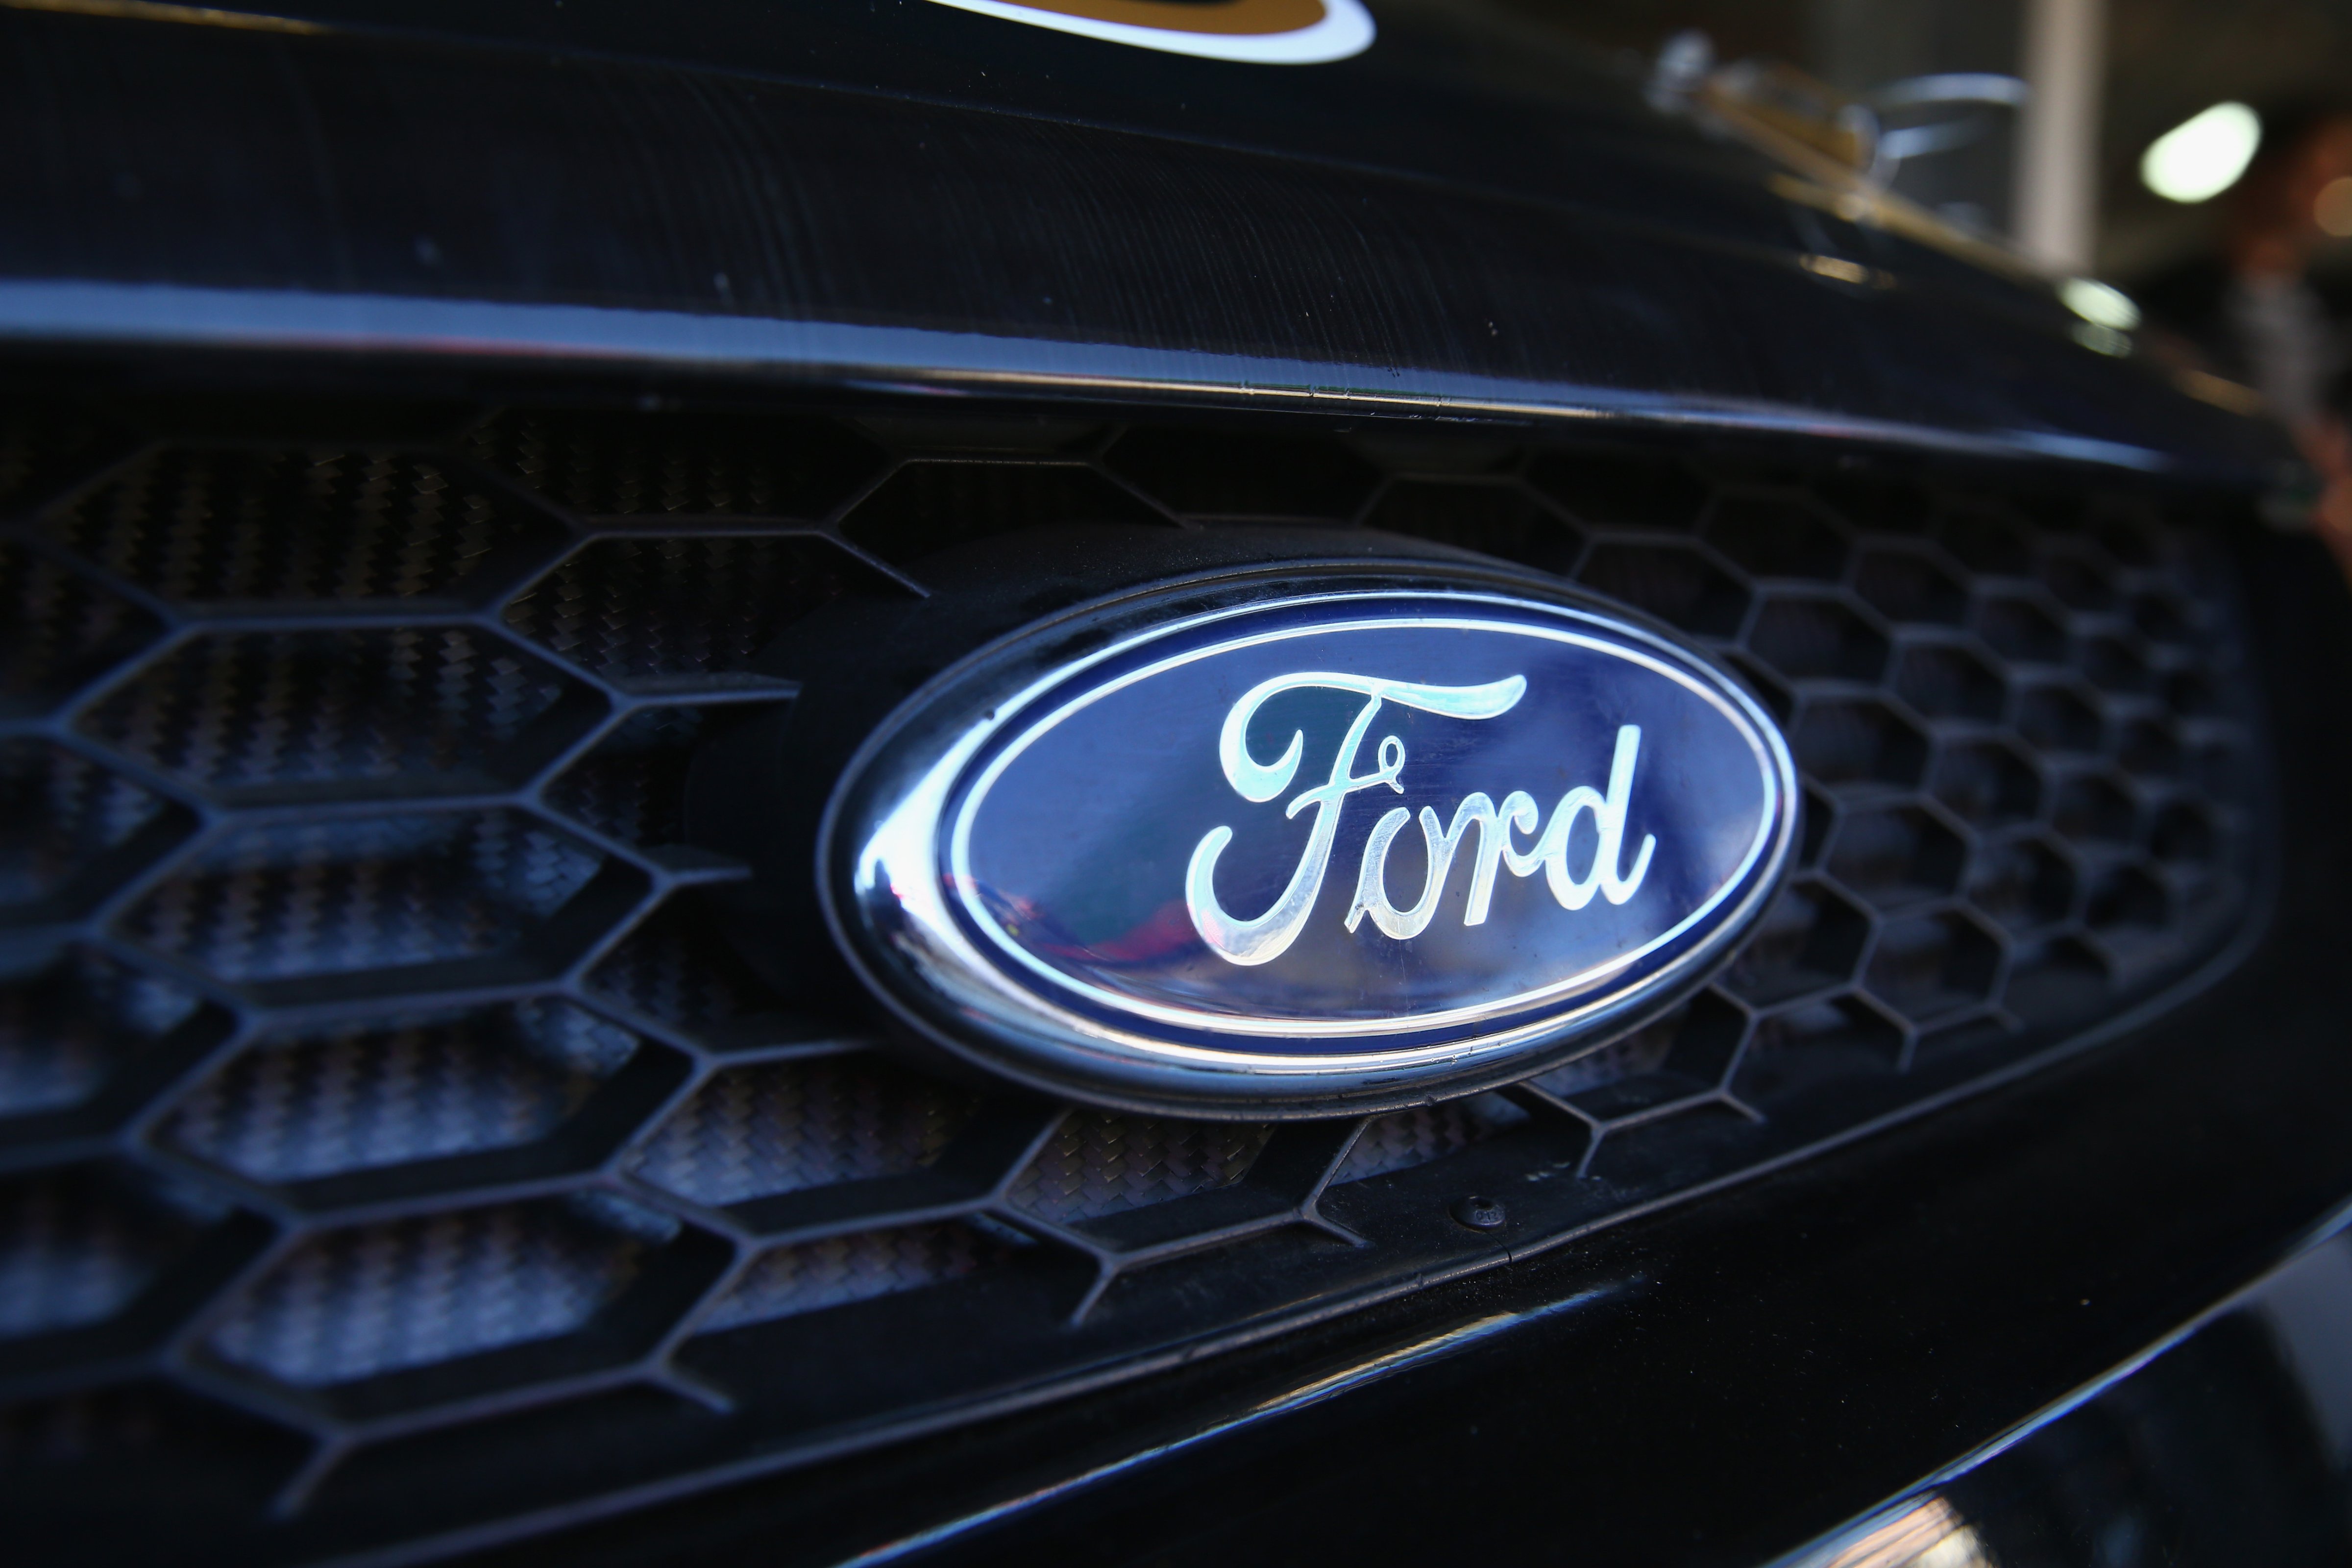 A general view of the Ford logo ahead of the V8 Supercars Clipsal 500 at Adelaide Street Circuit on February 26, 2015 in Adelaide, Australia. (Robert Cianflone&mdash;Getty Images)